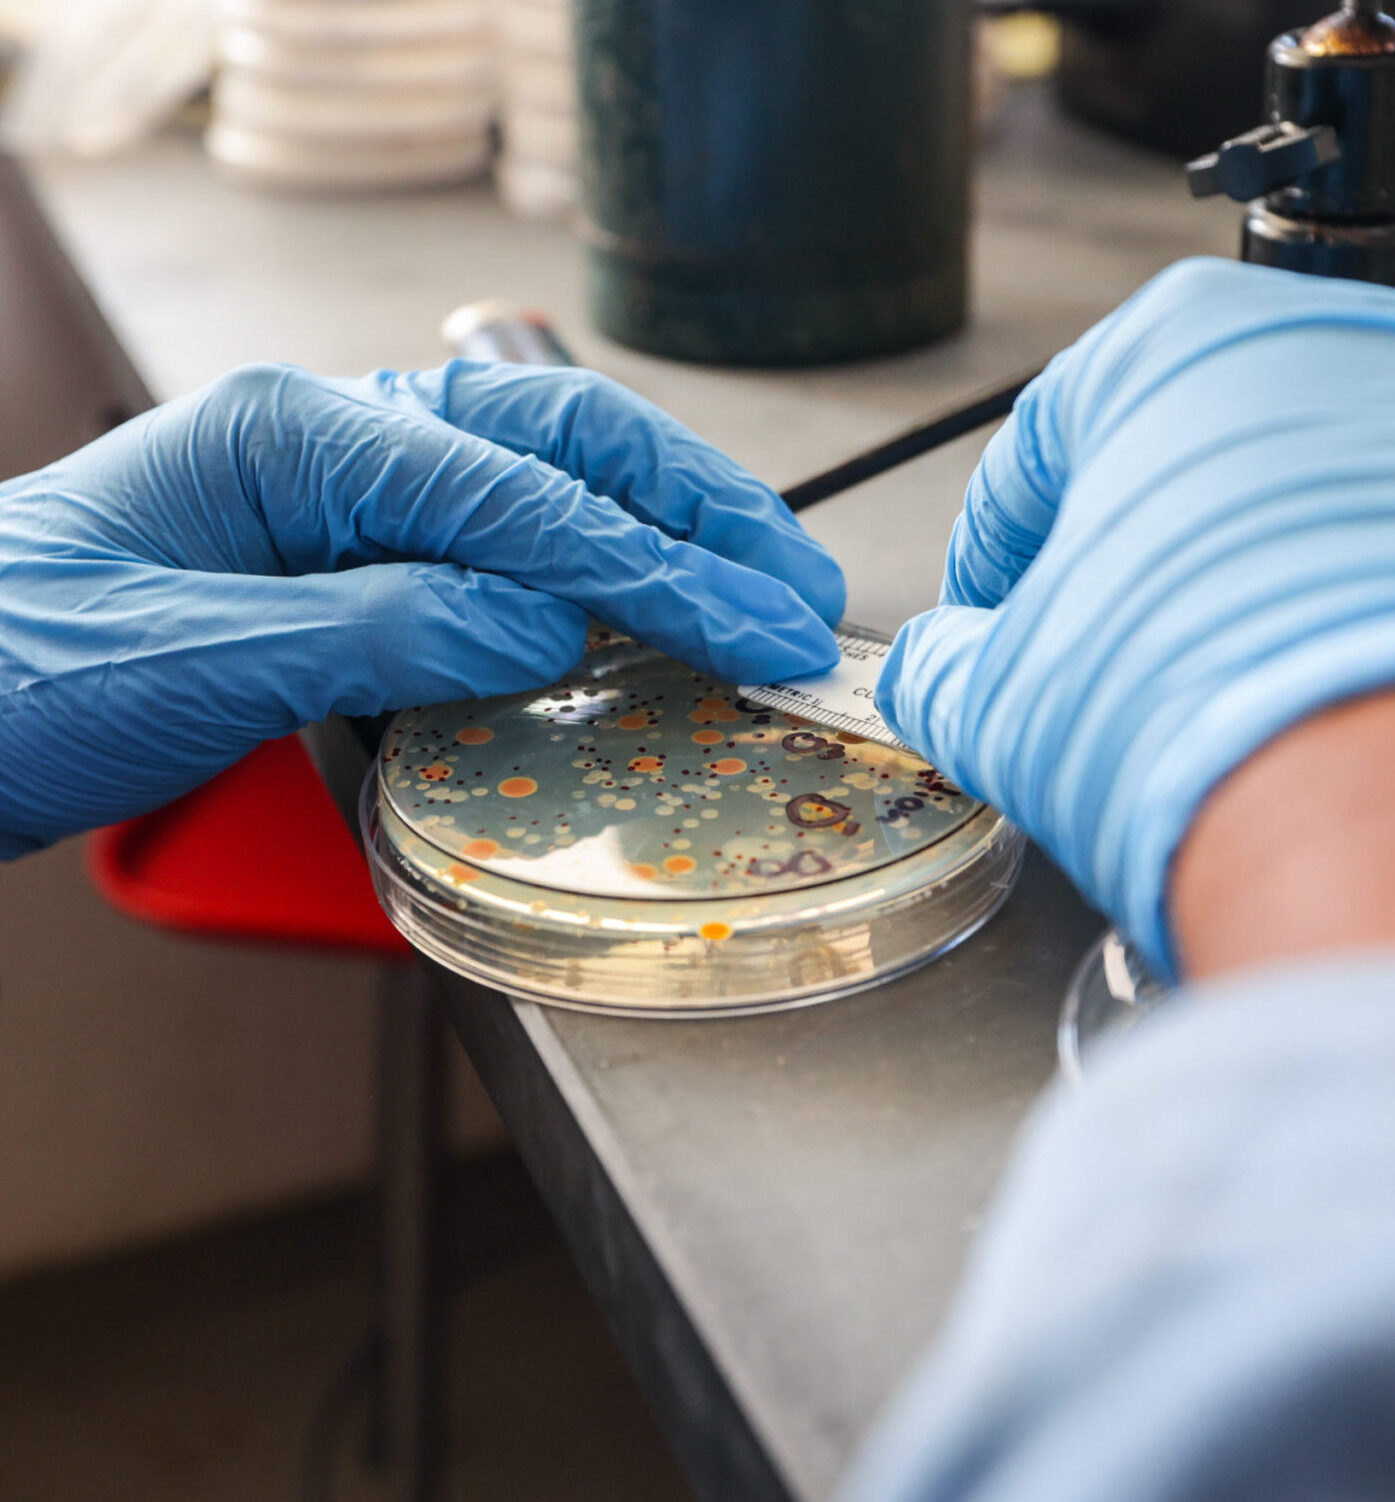 Gloved hands measuring a petri dish on a desk